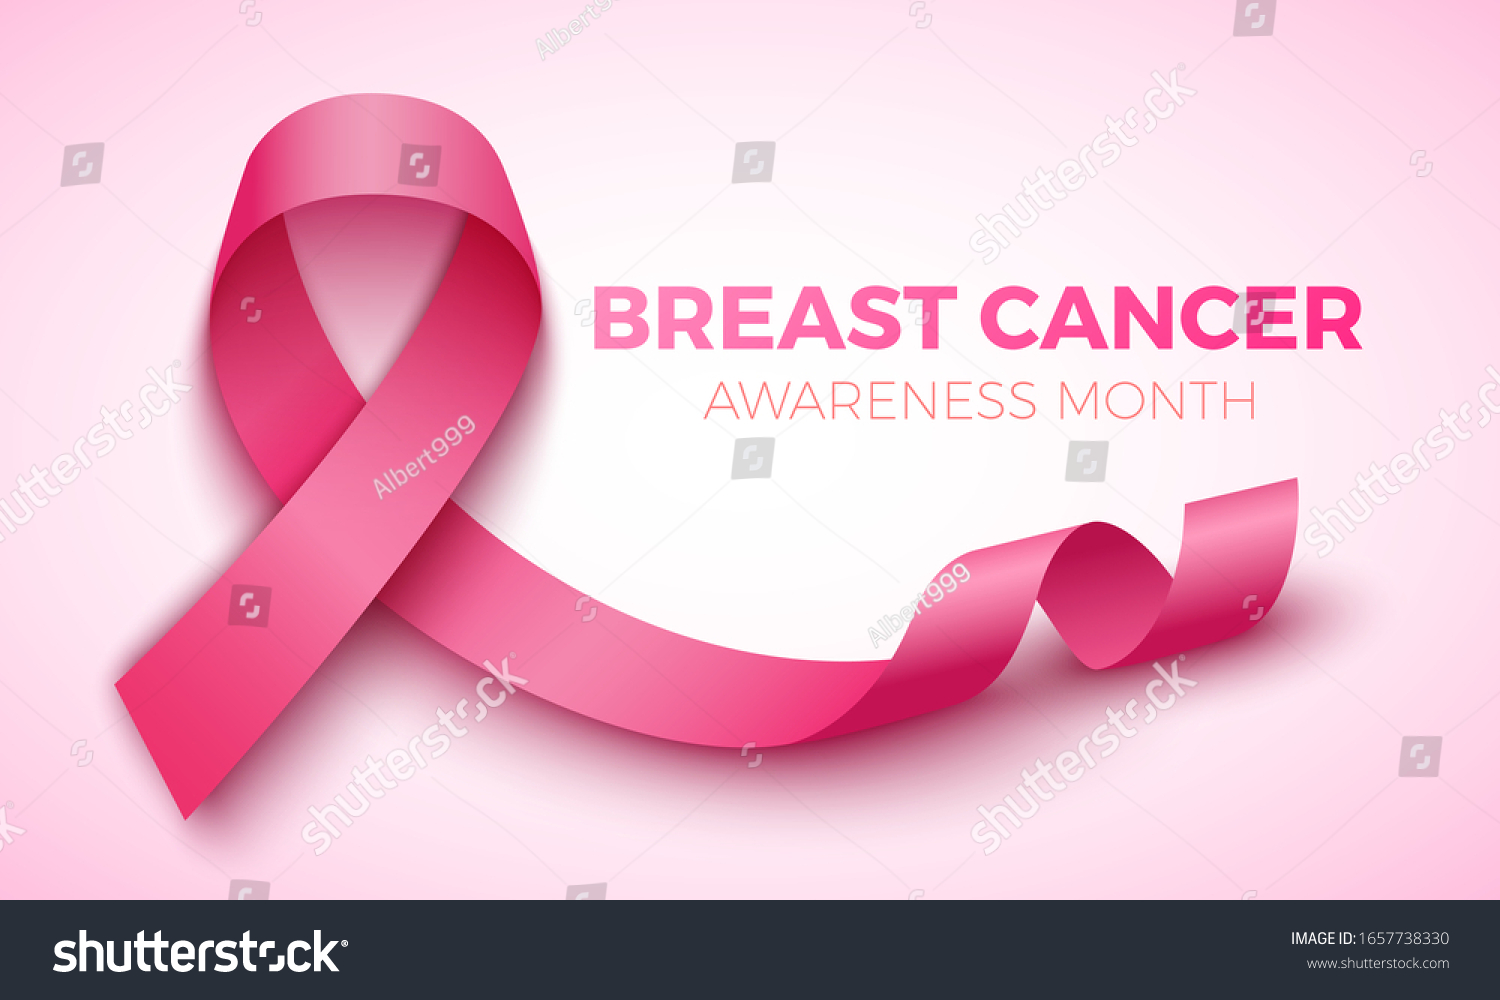 Breast cancer day